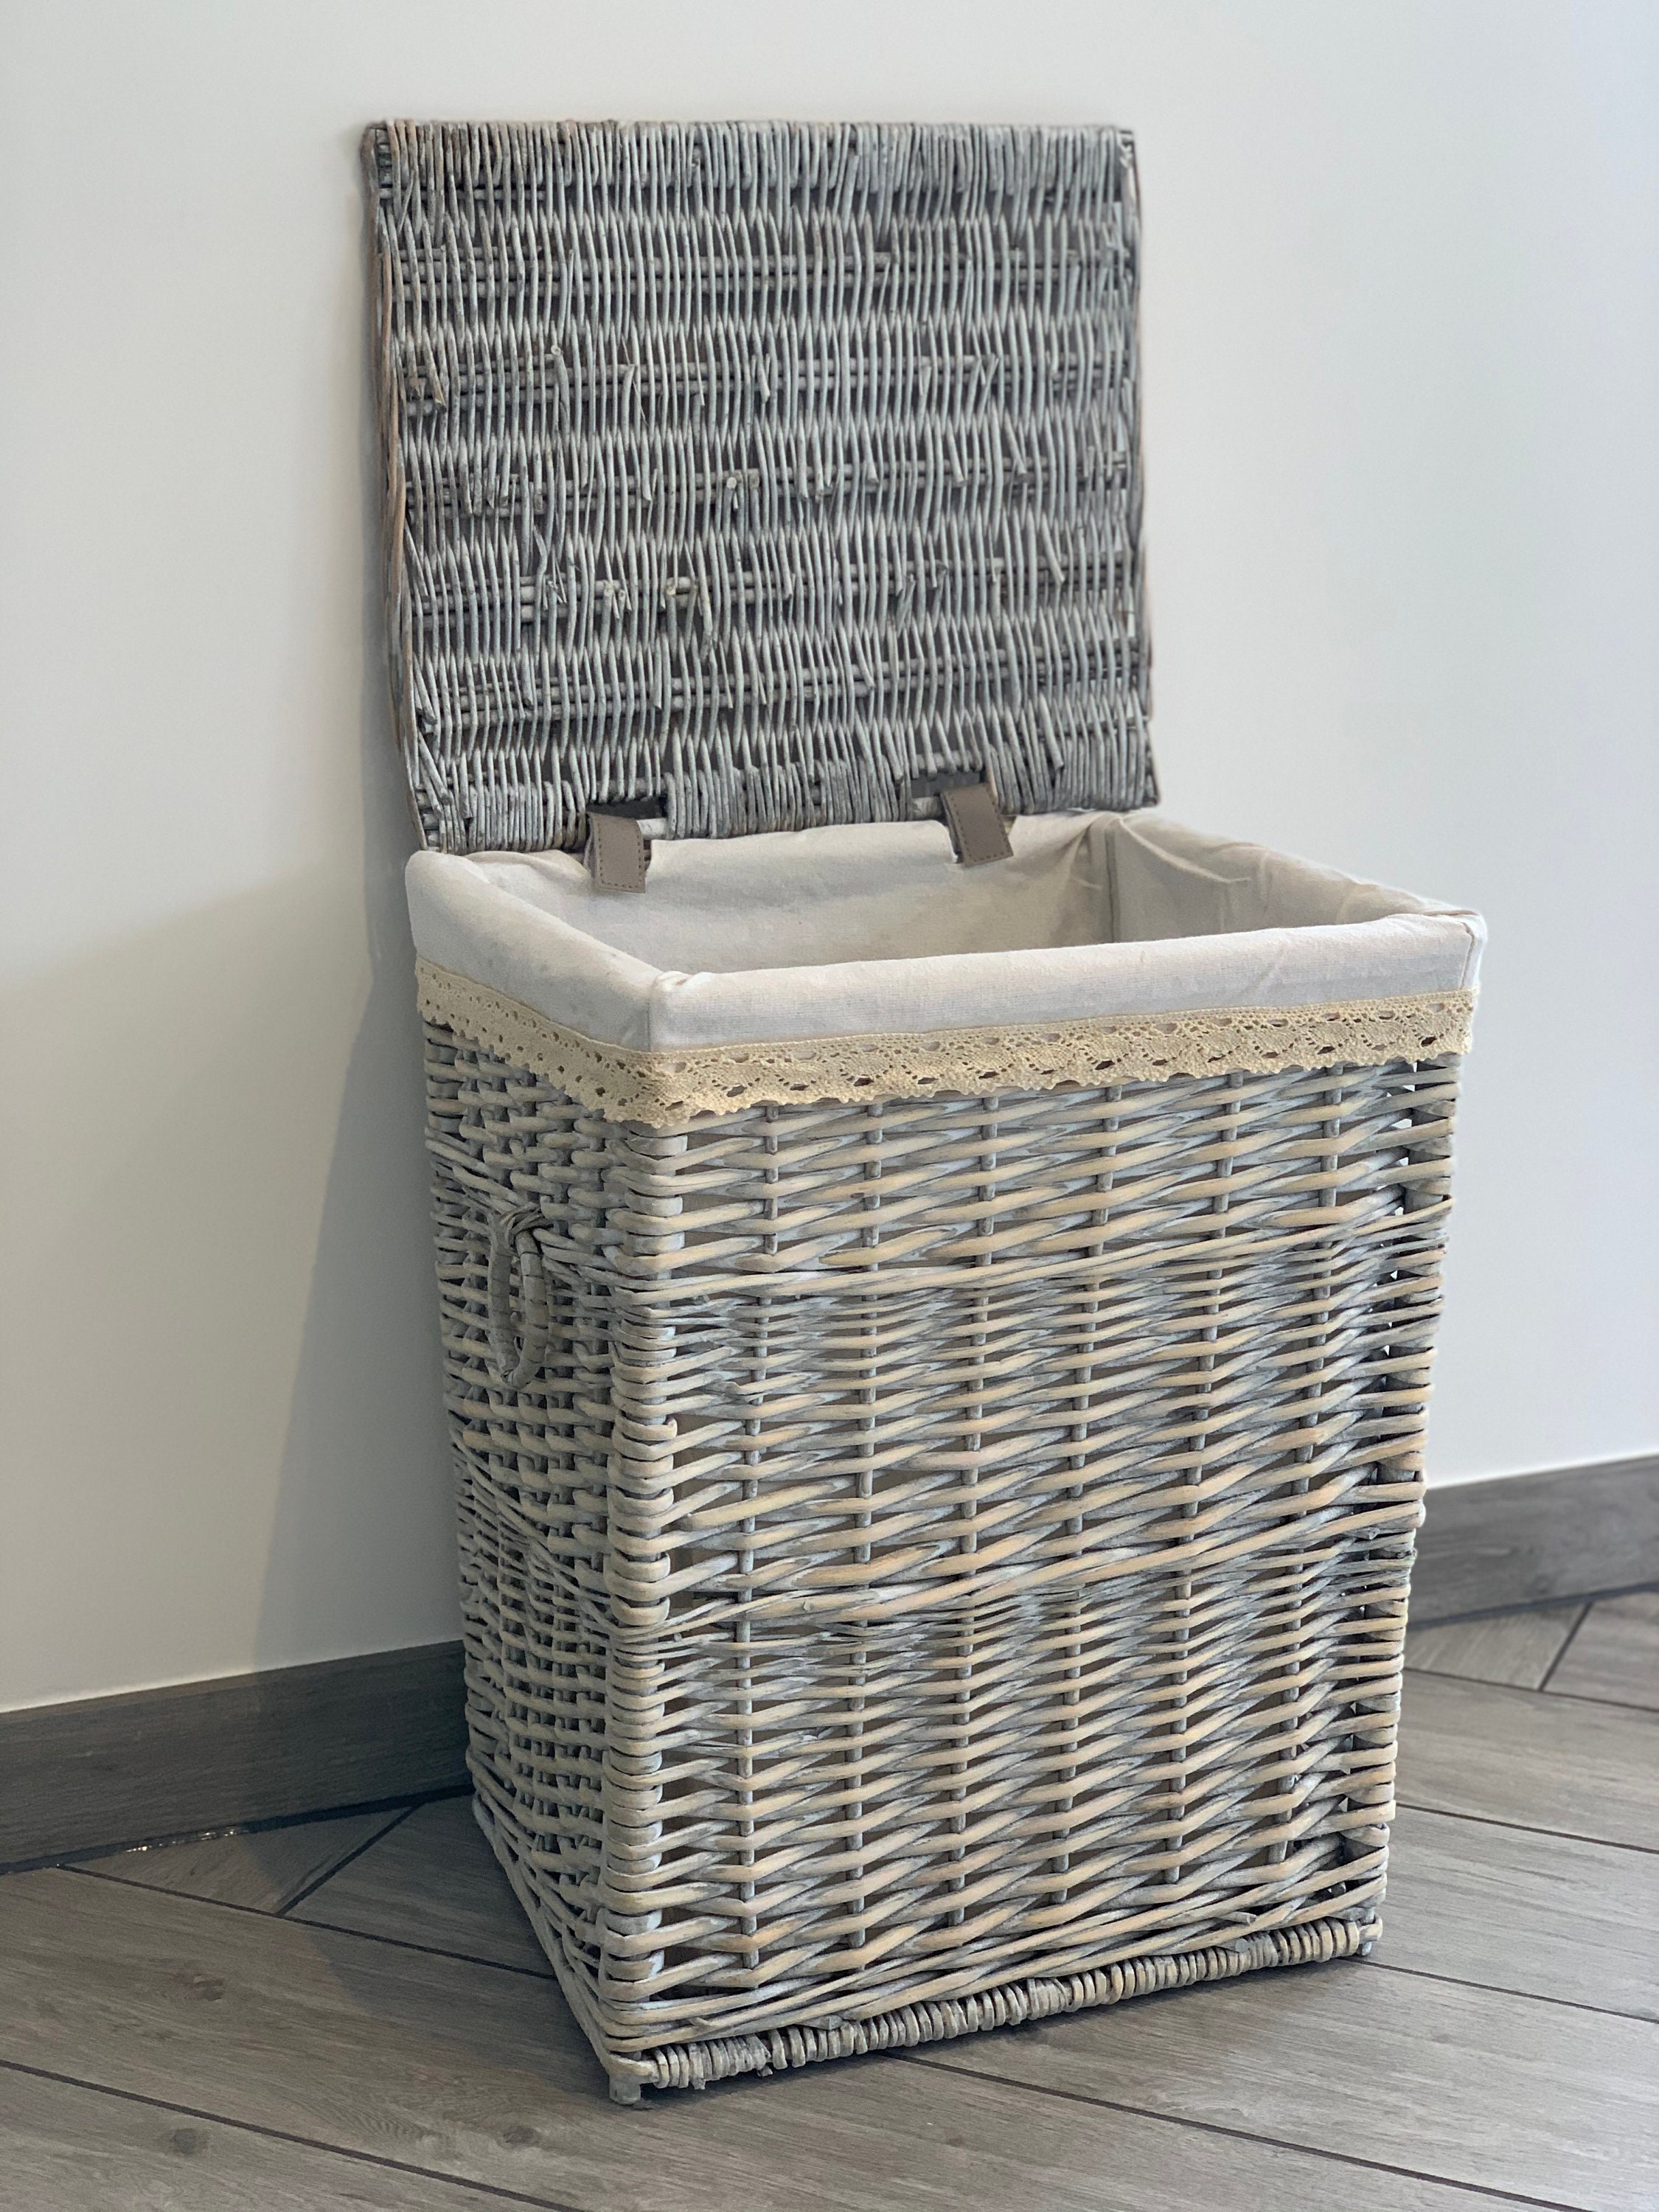 Large Rectangular Laundry Bin Linen Willow Wicker Basket With Lining Grey New UK 